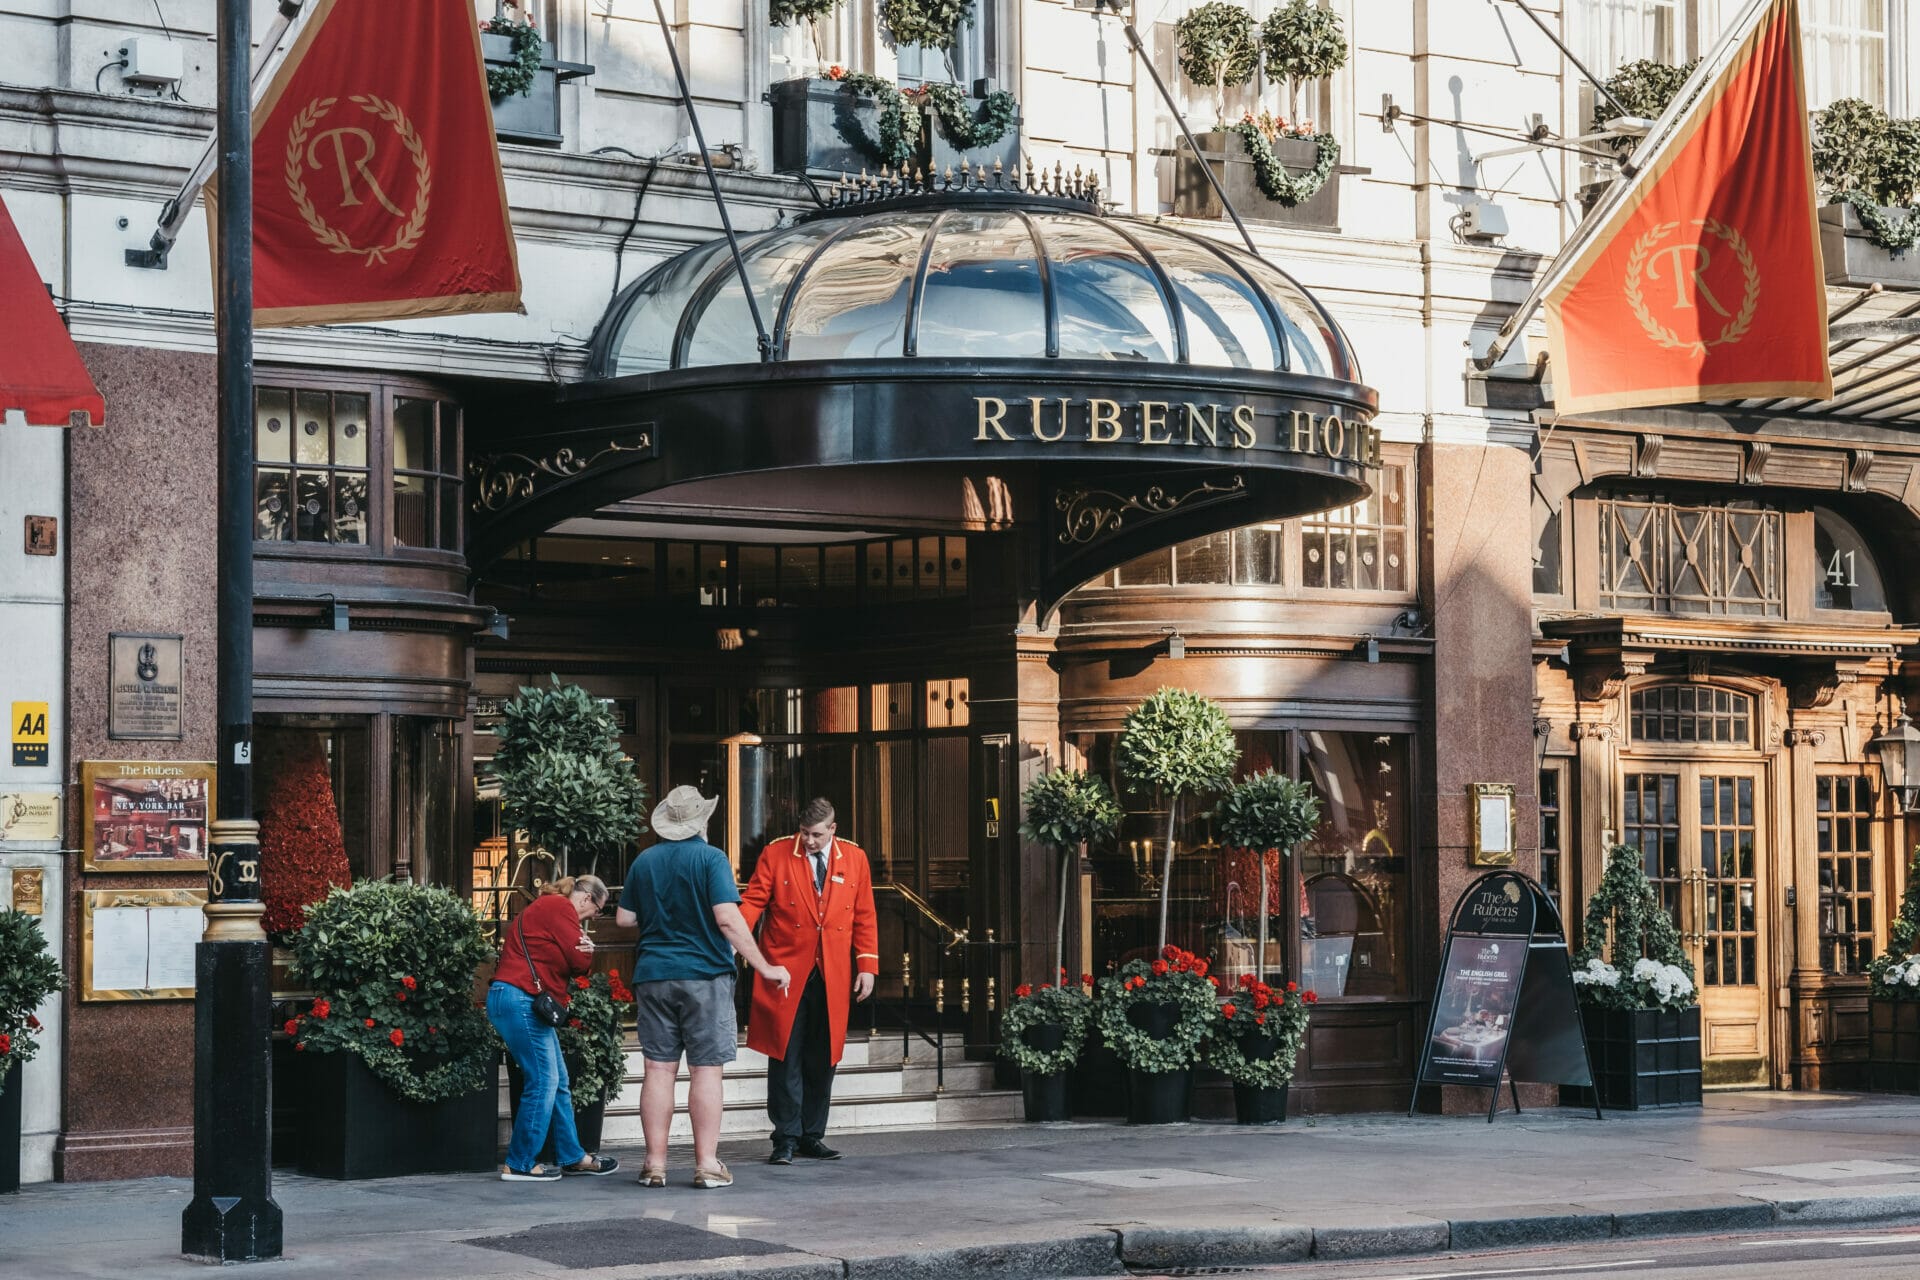 London, UK - July 15, 2019: People talking to butler outside The Rubens at the Palace, a 5 star hotel located in central London with views across the Royal Mews at Buckingham Palace.